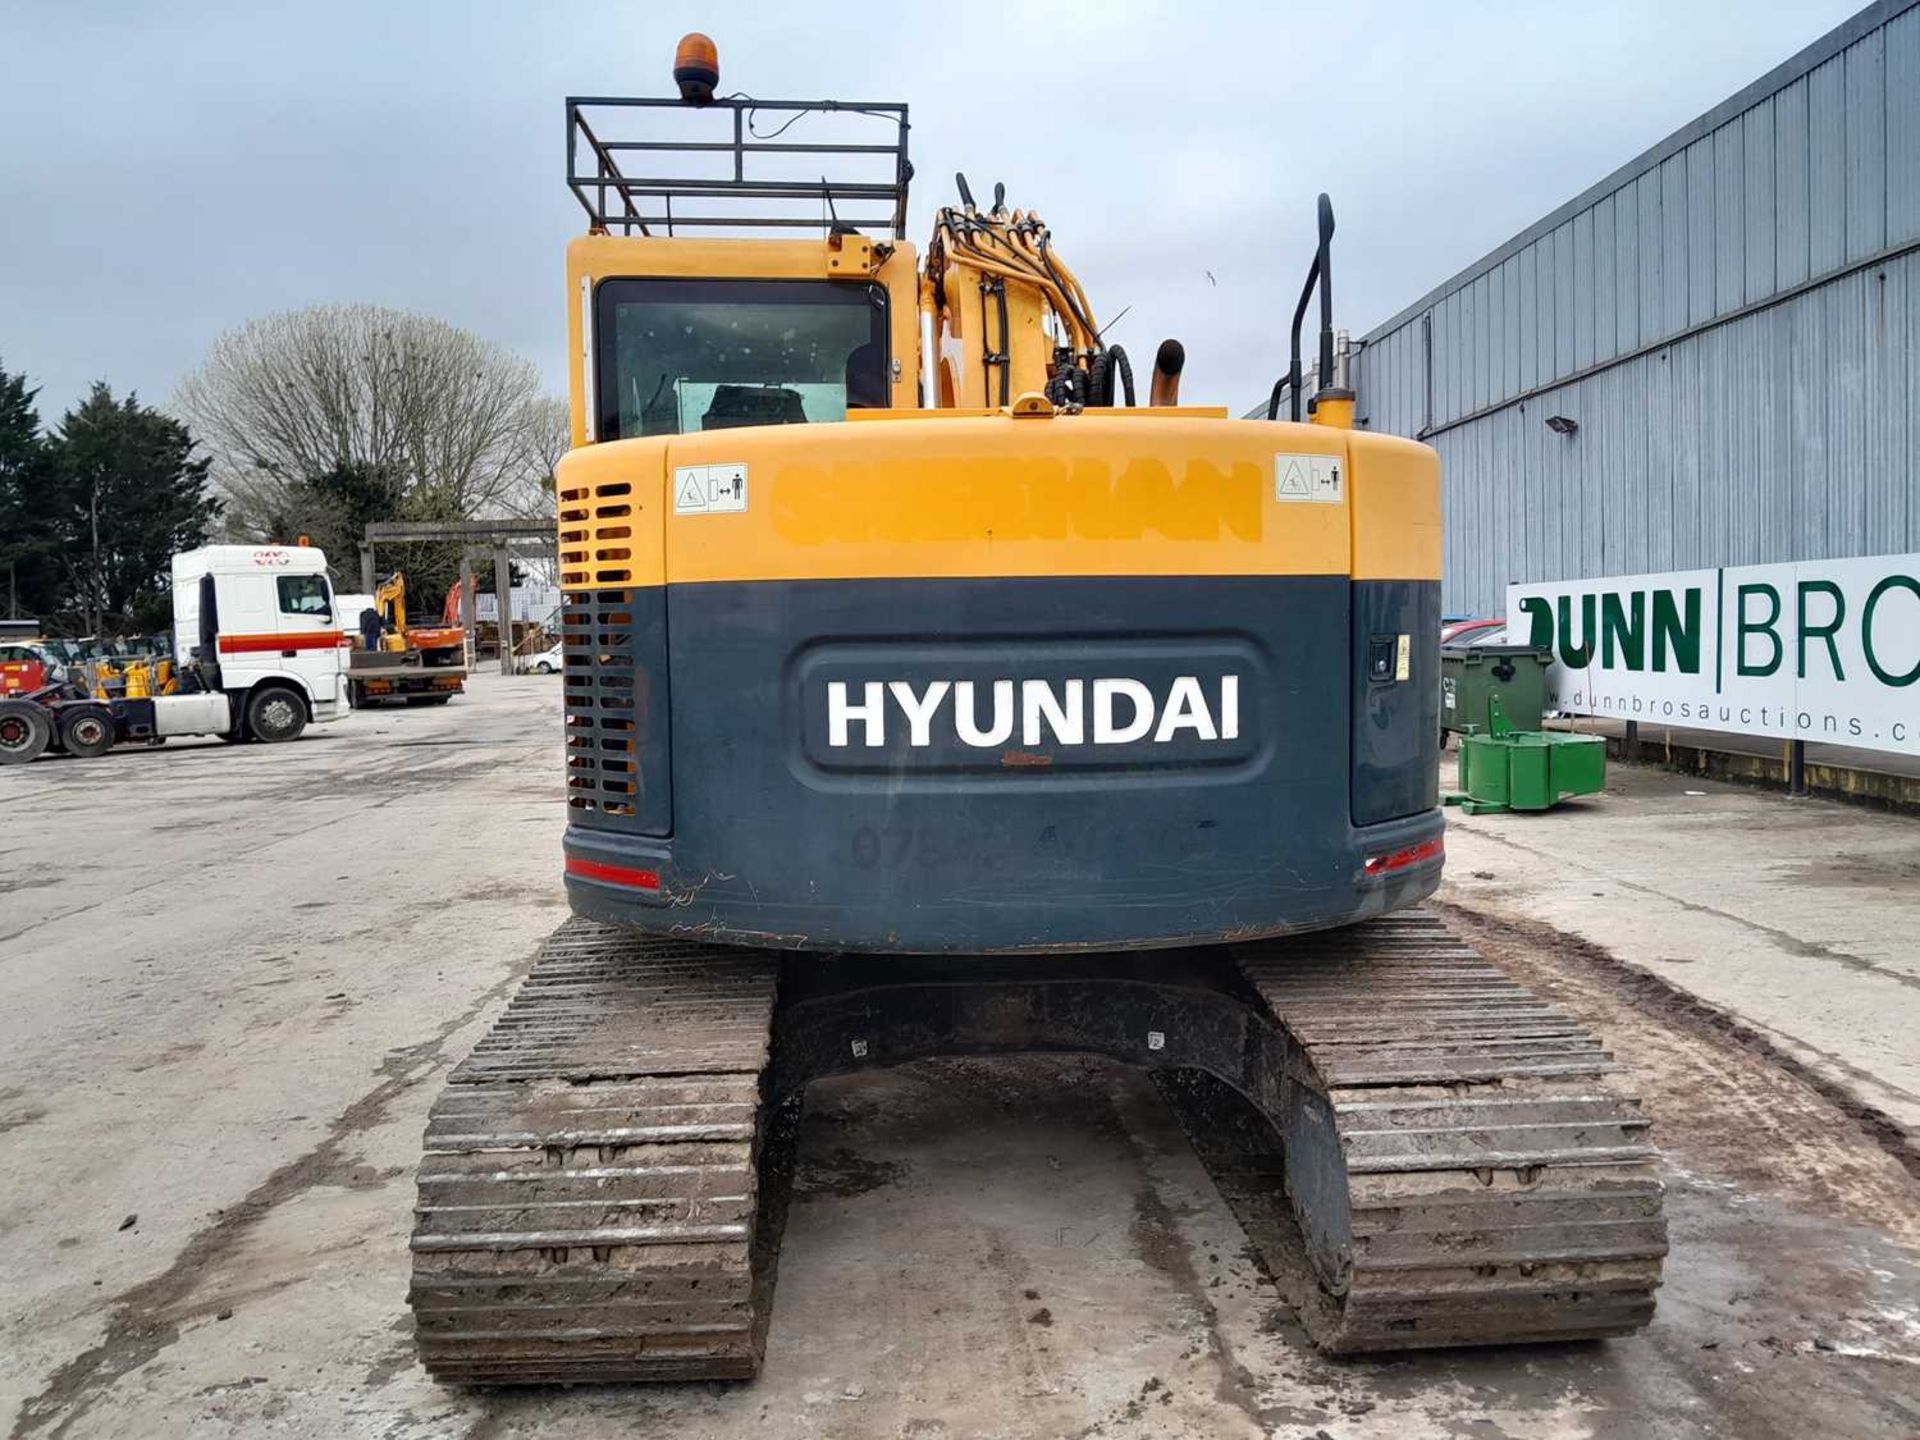 2014 Hyundai R145LCR-9A, 700mm Steel Tracks, CV, Geith Hydraulic QH, Piped, Aux. Piping, Reverse Cam - Image 4 of 33